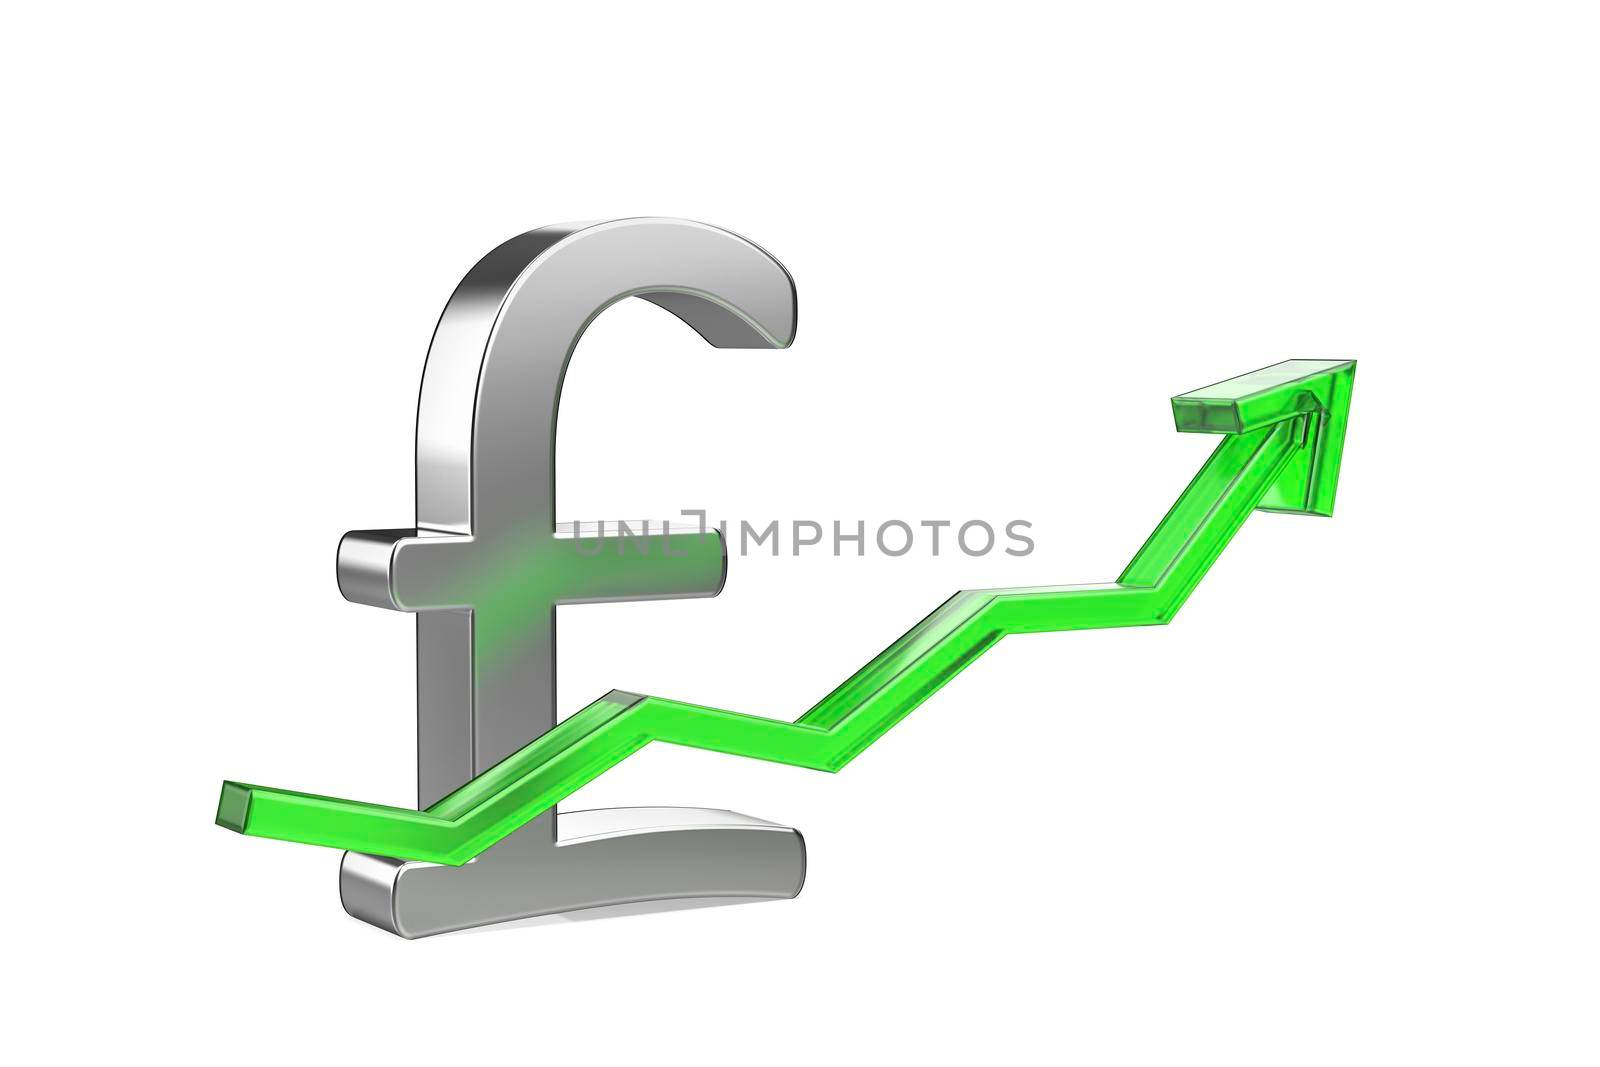 Increasing the value of British pound currency, concept image